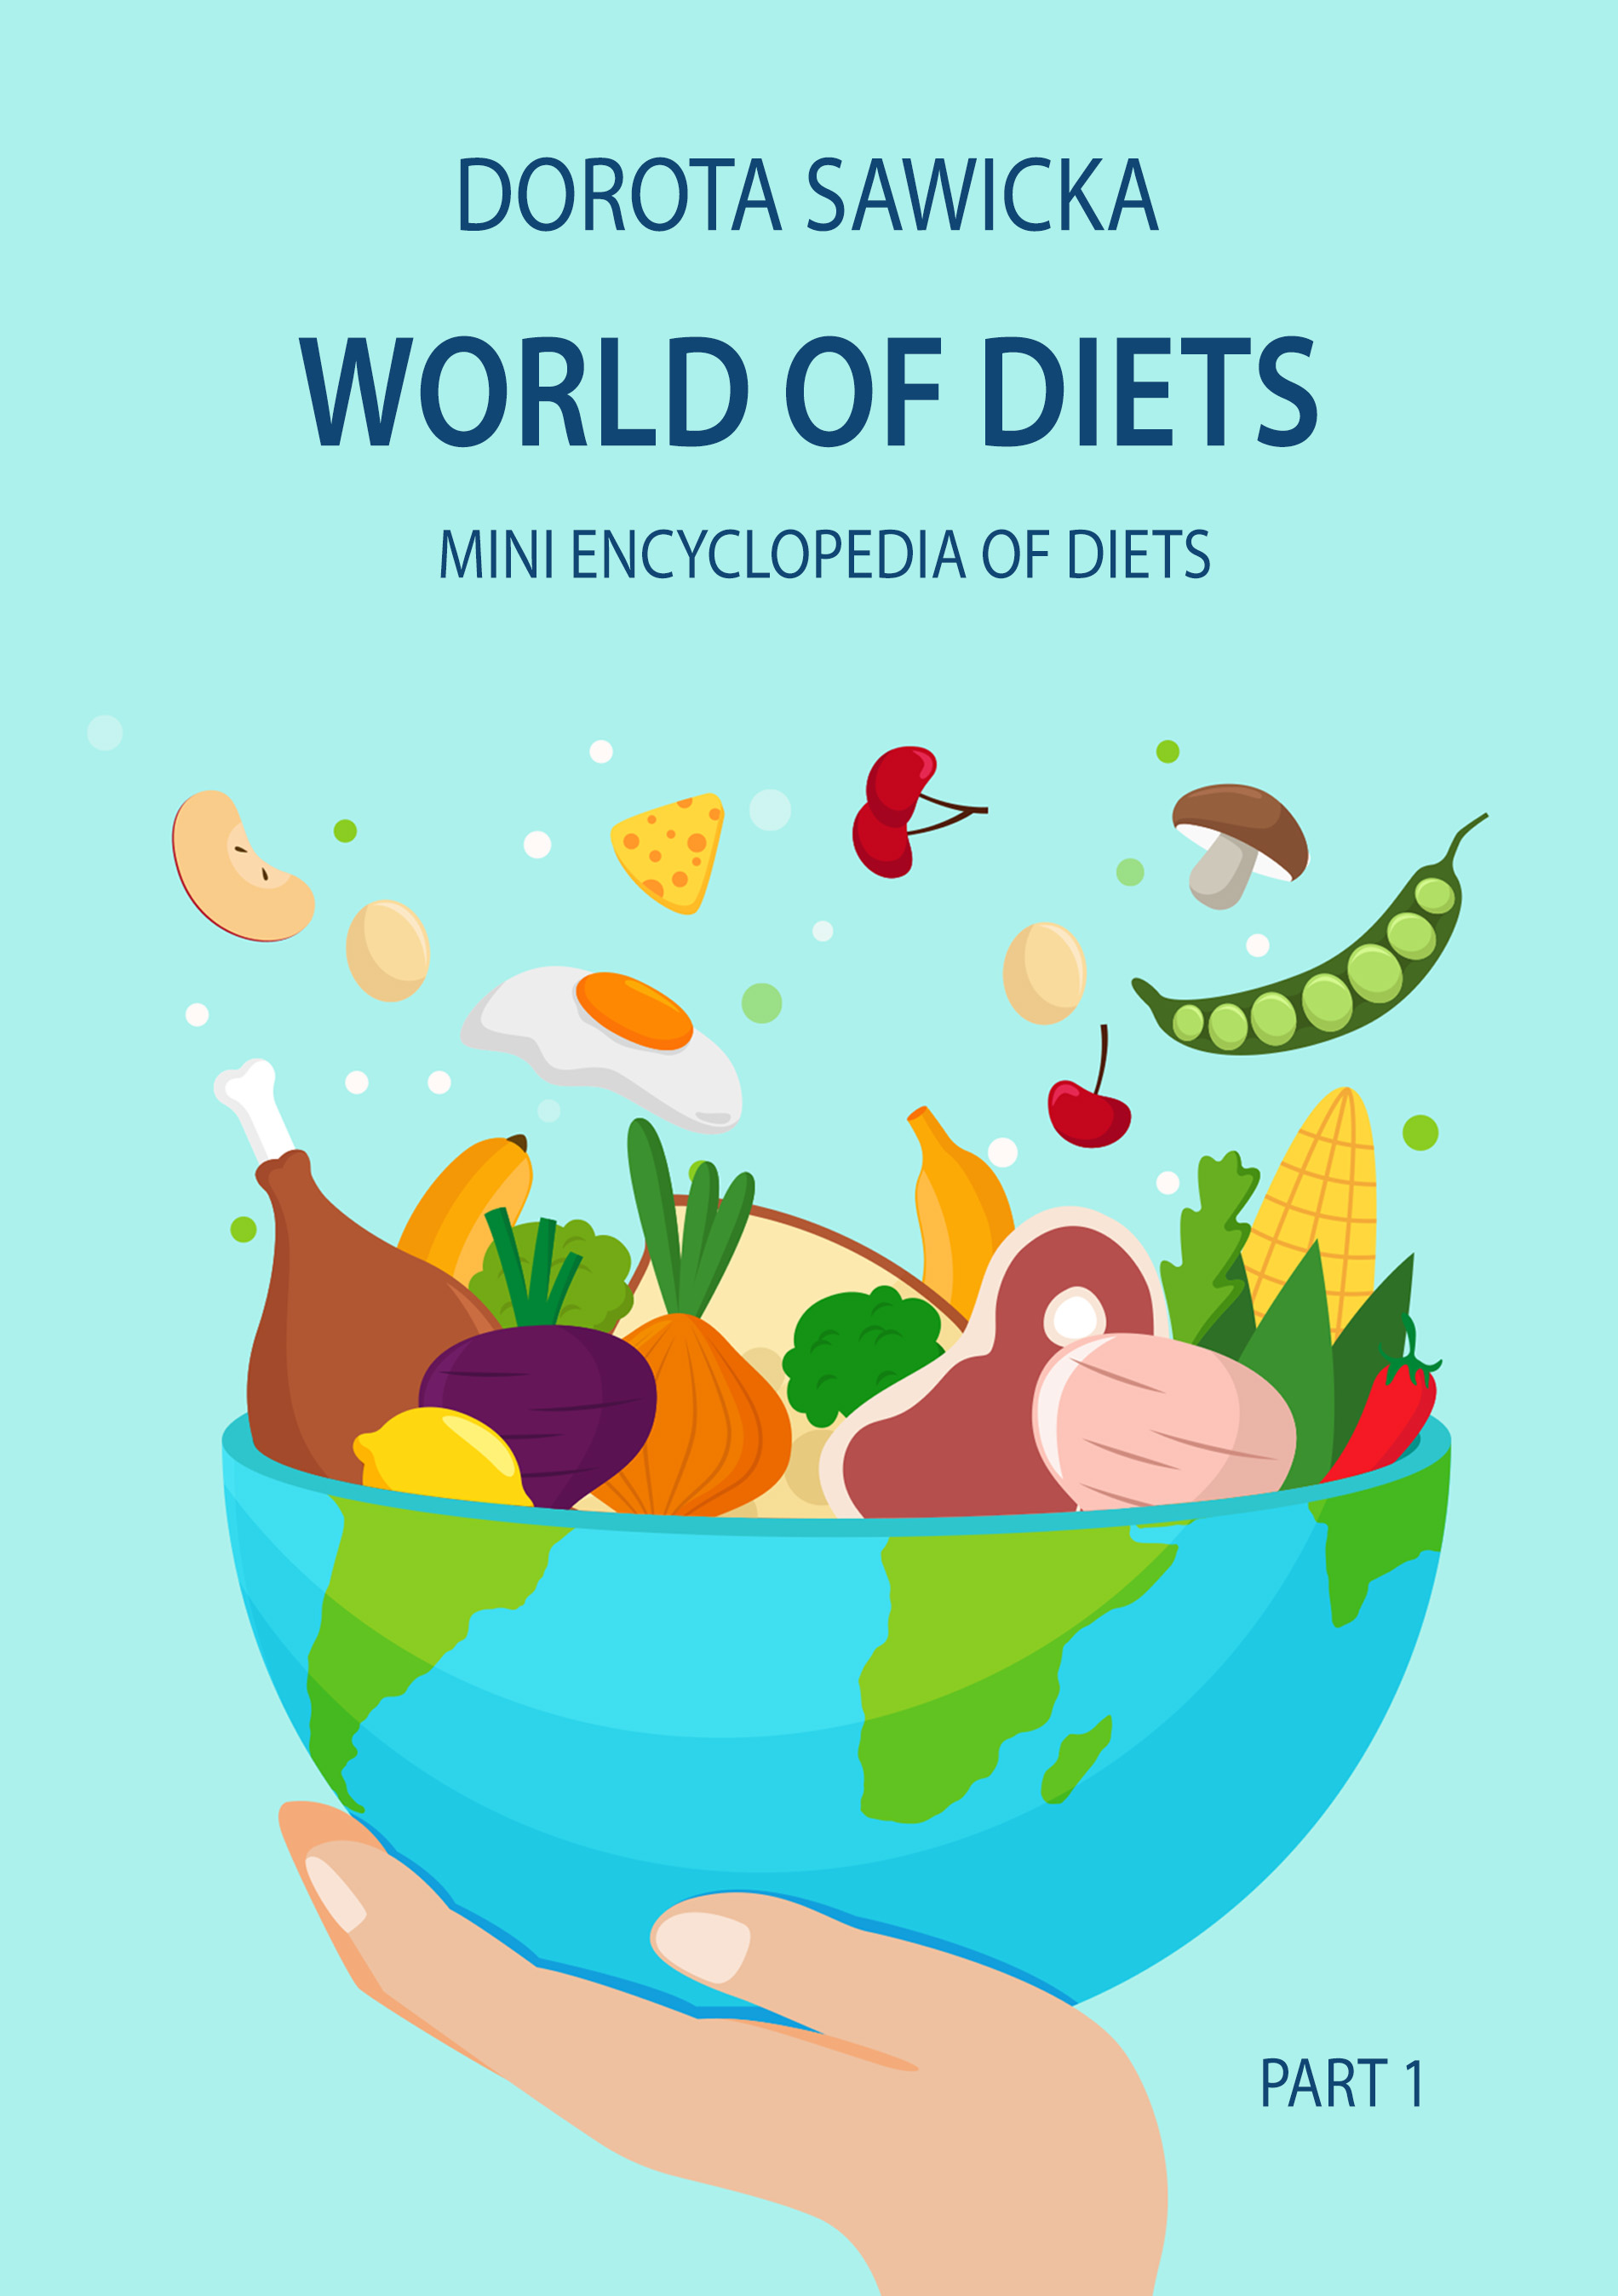 World of diets